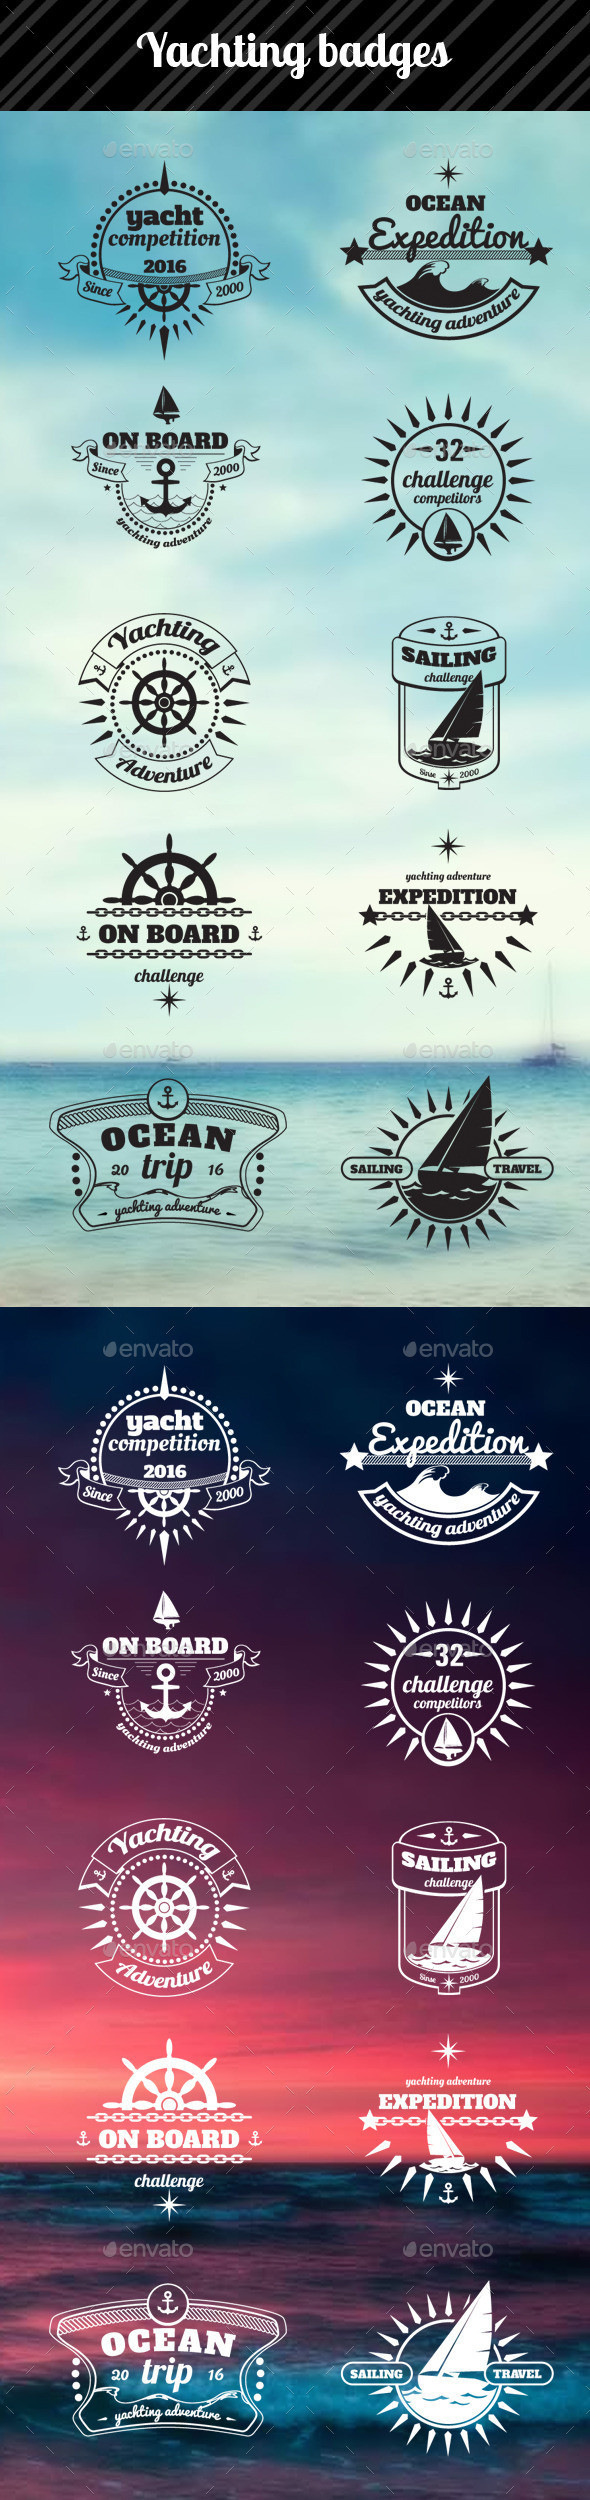 Yachting badges preview